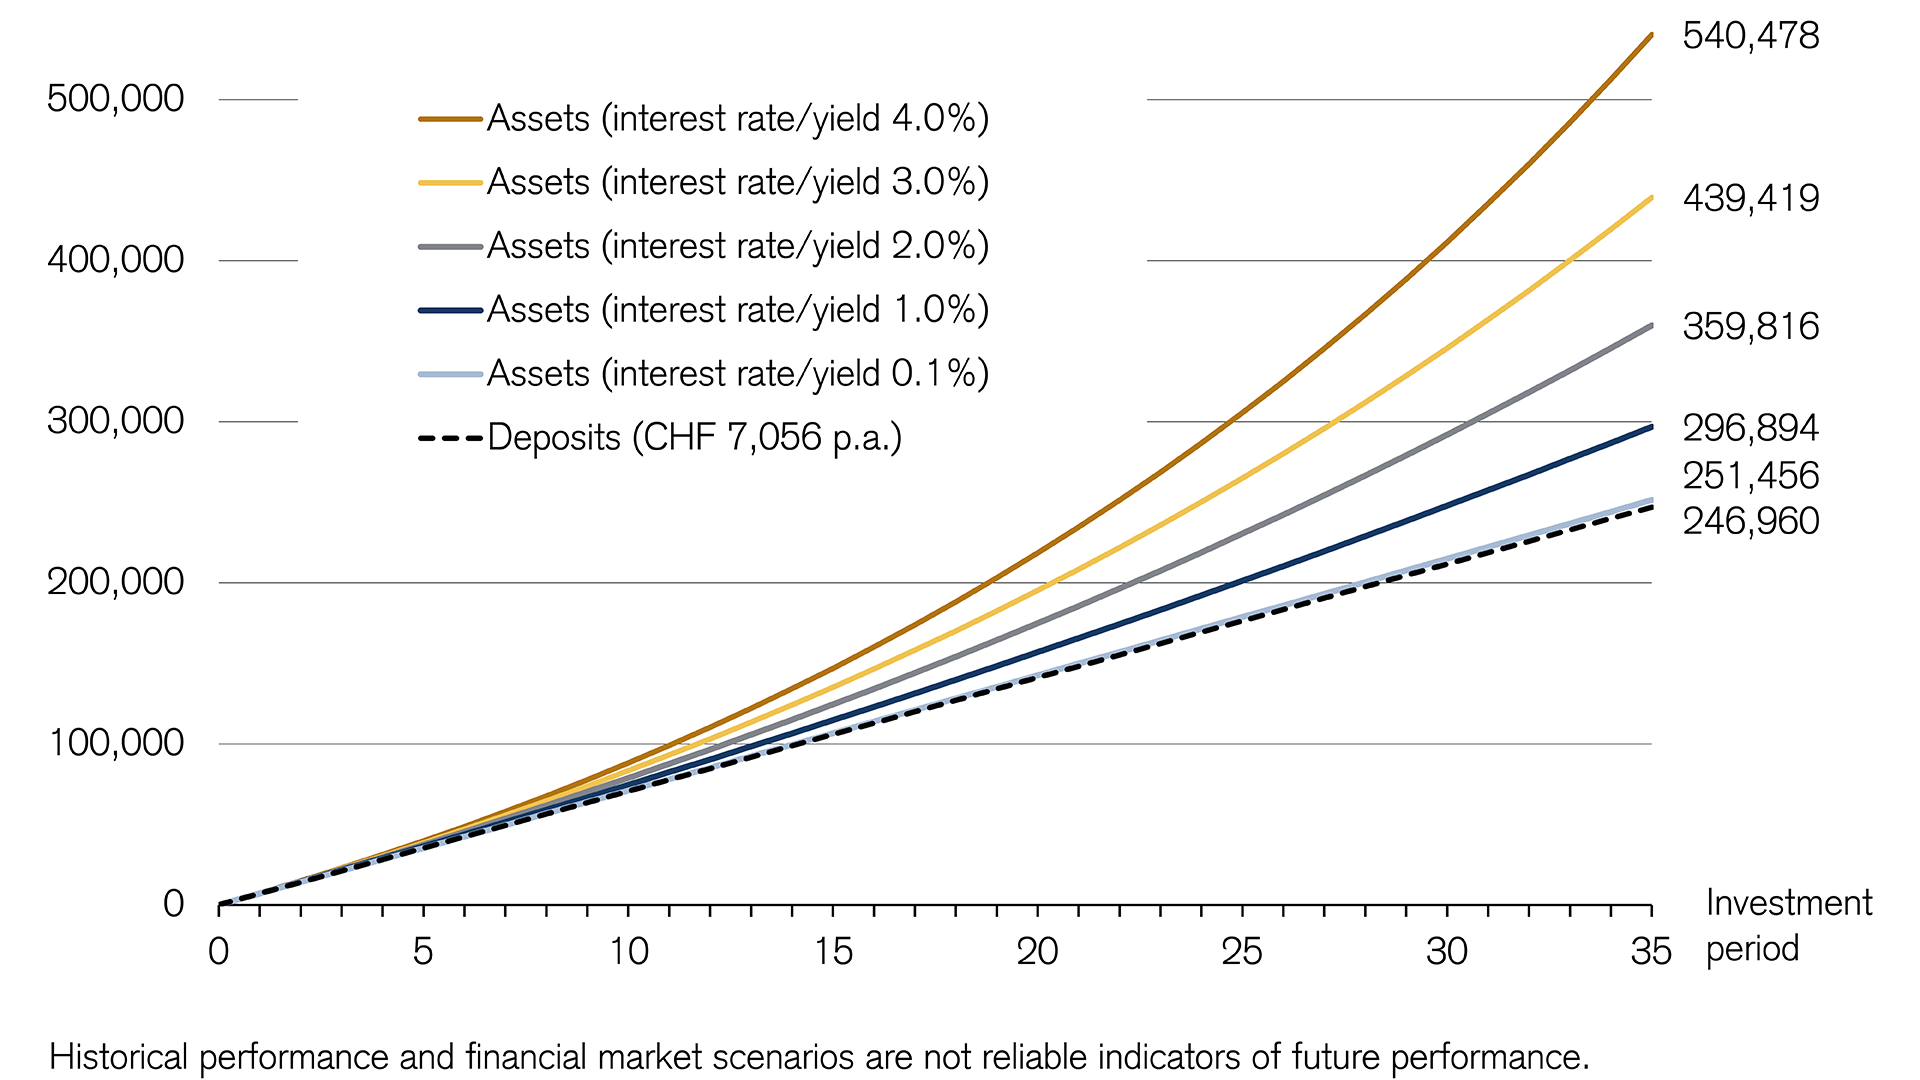 Interest rate/yield is crucial for wealth accumulation